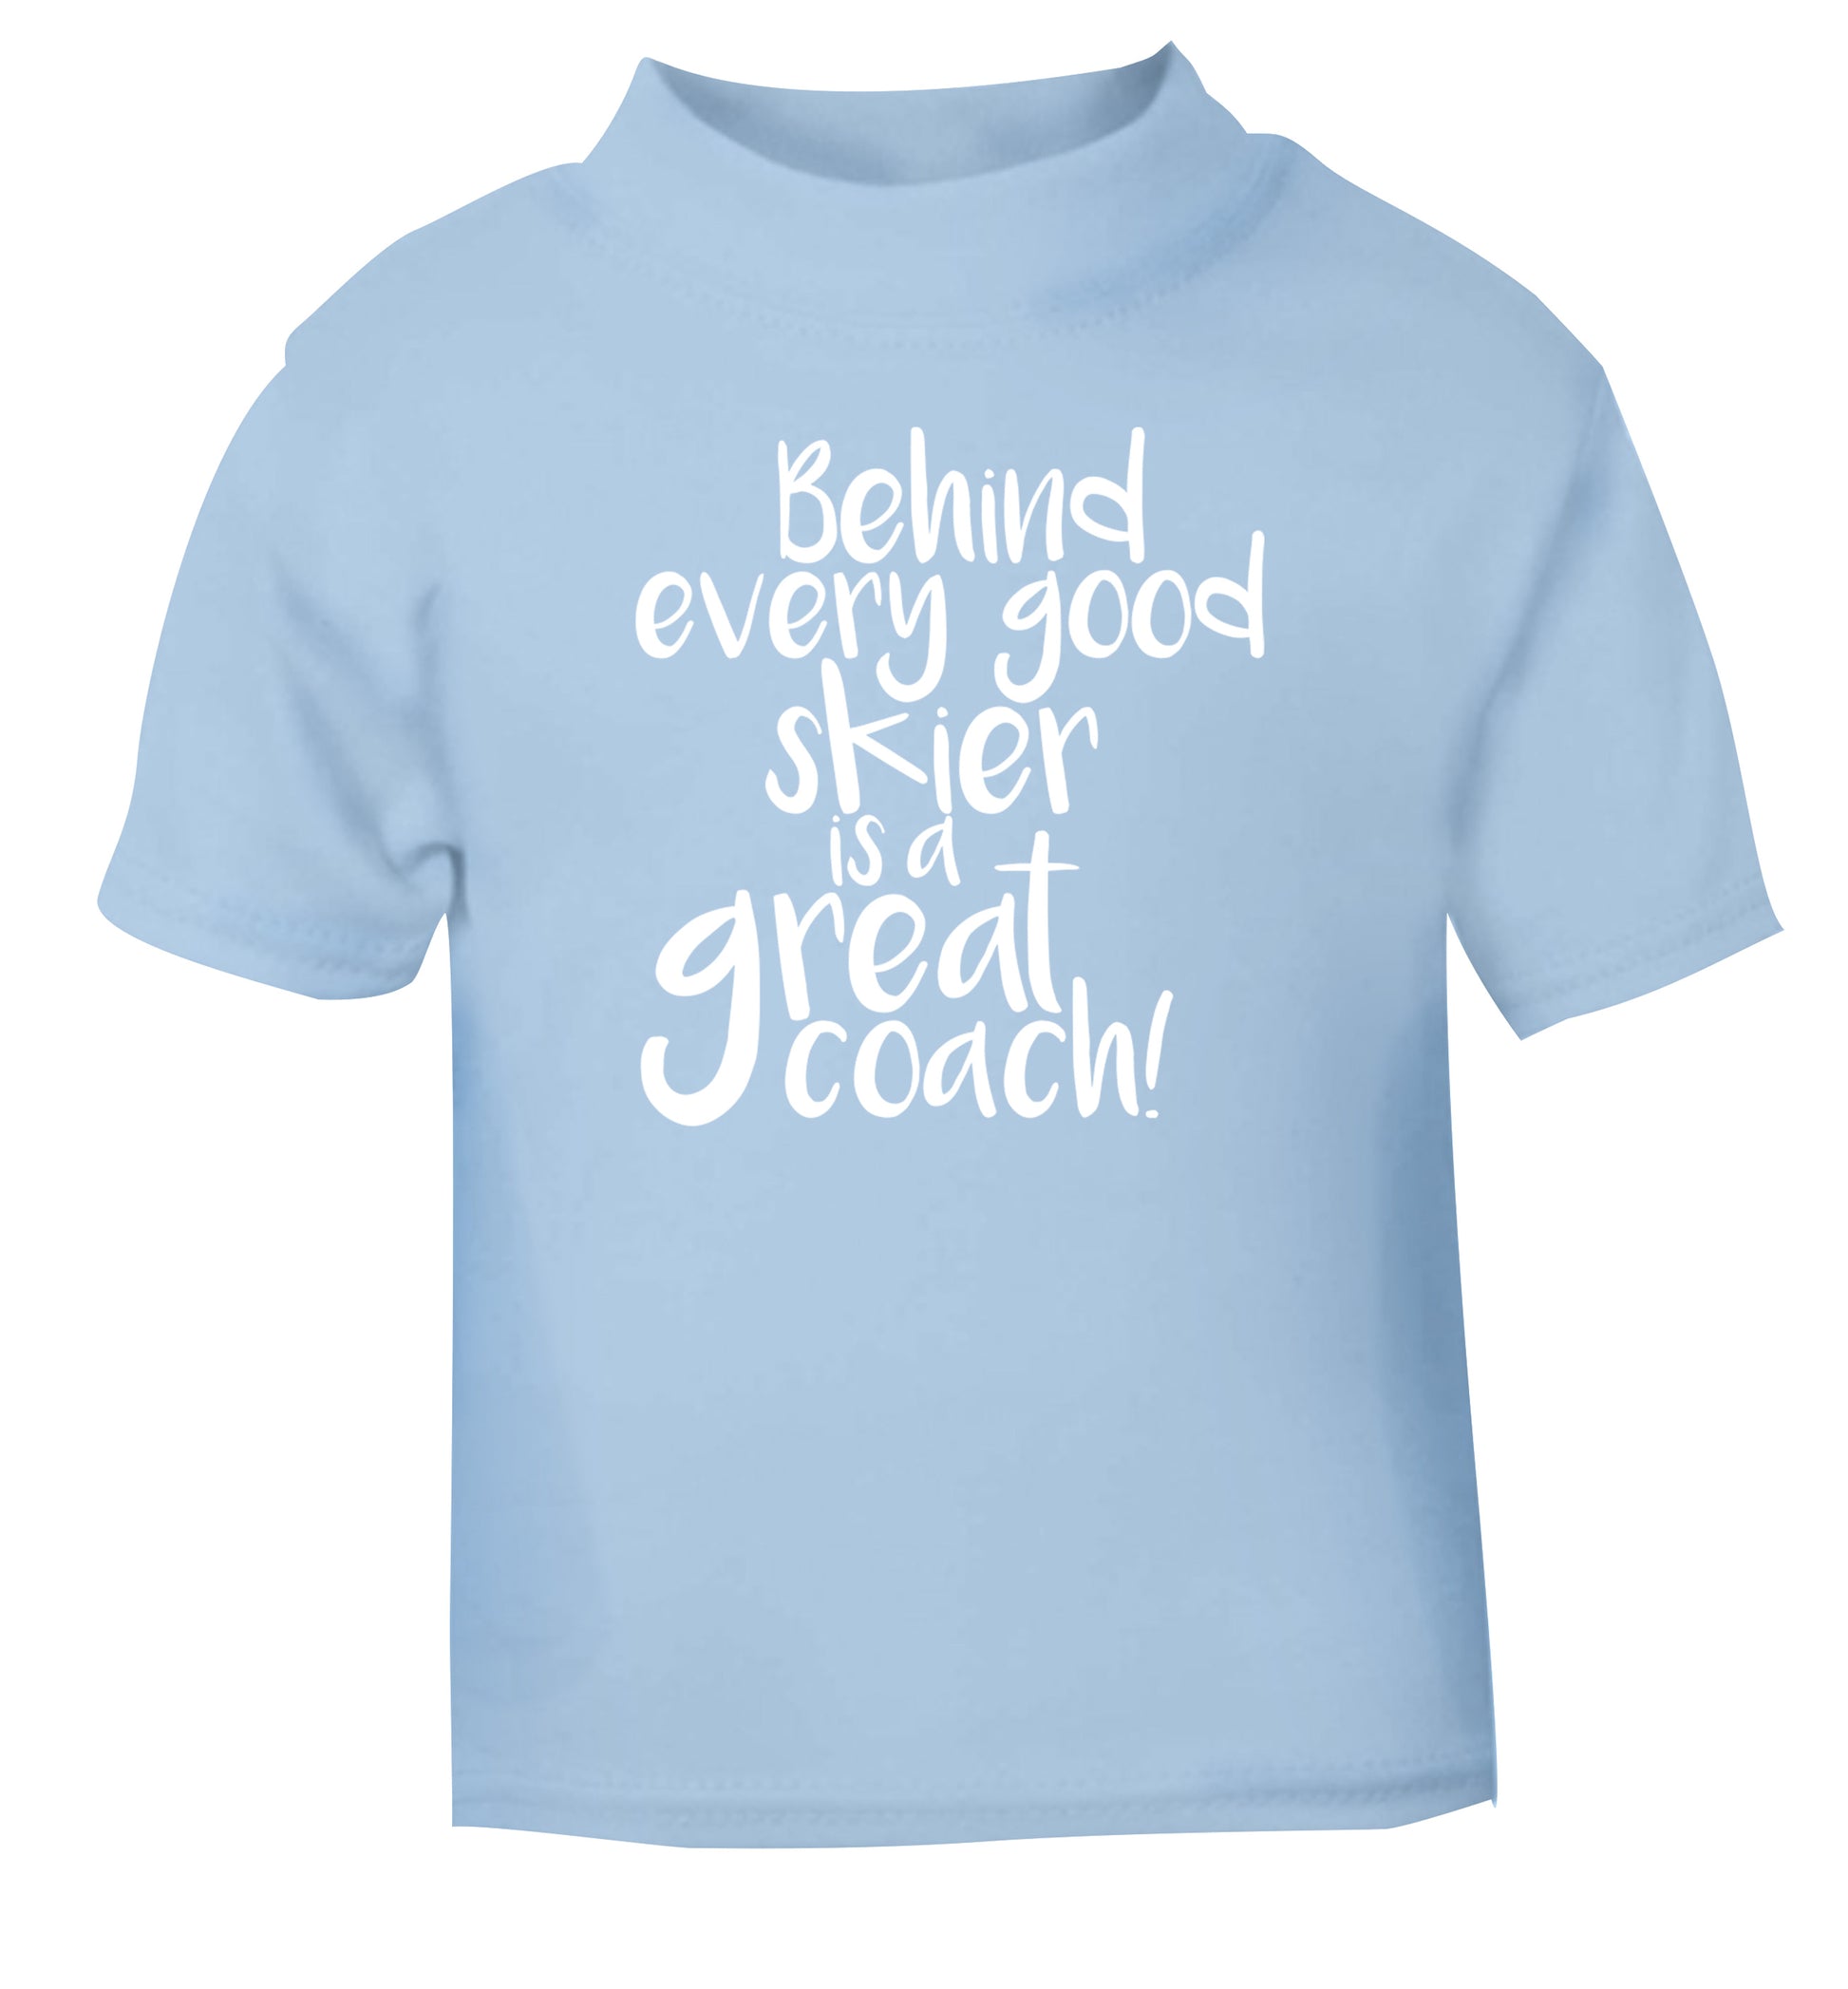 Behind every good skier is a great coach! light blue Baby Toddler Tshirt 2 Years